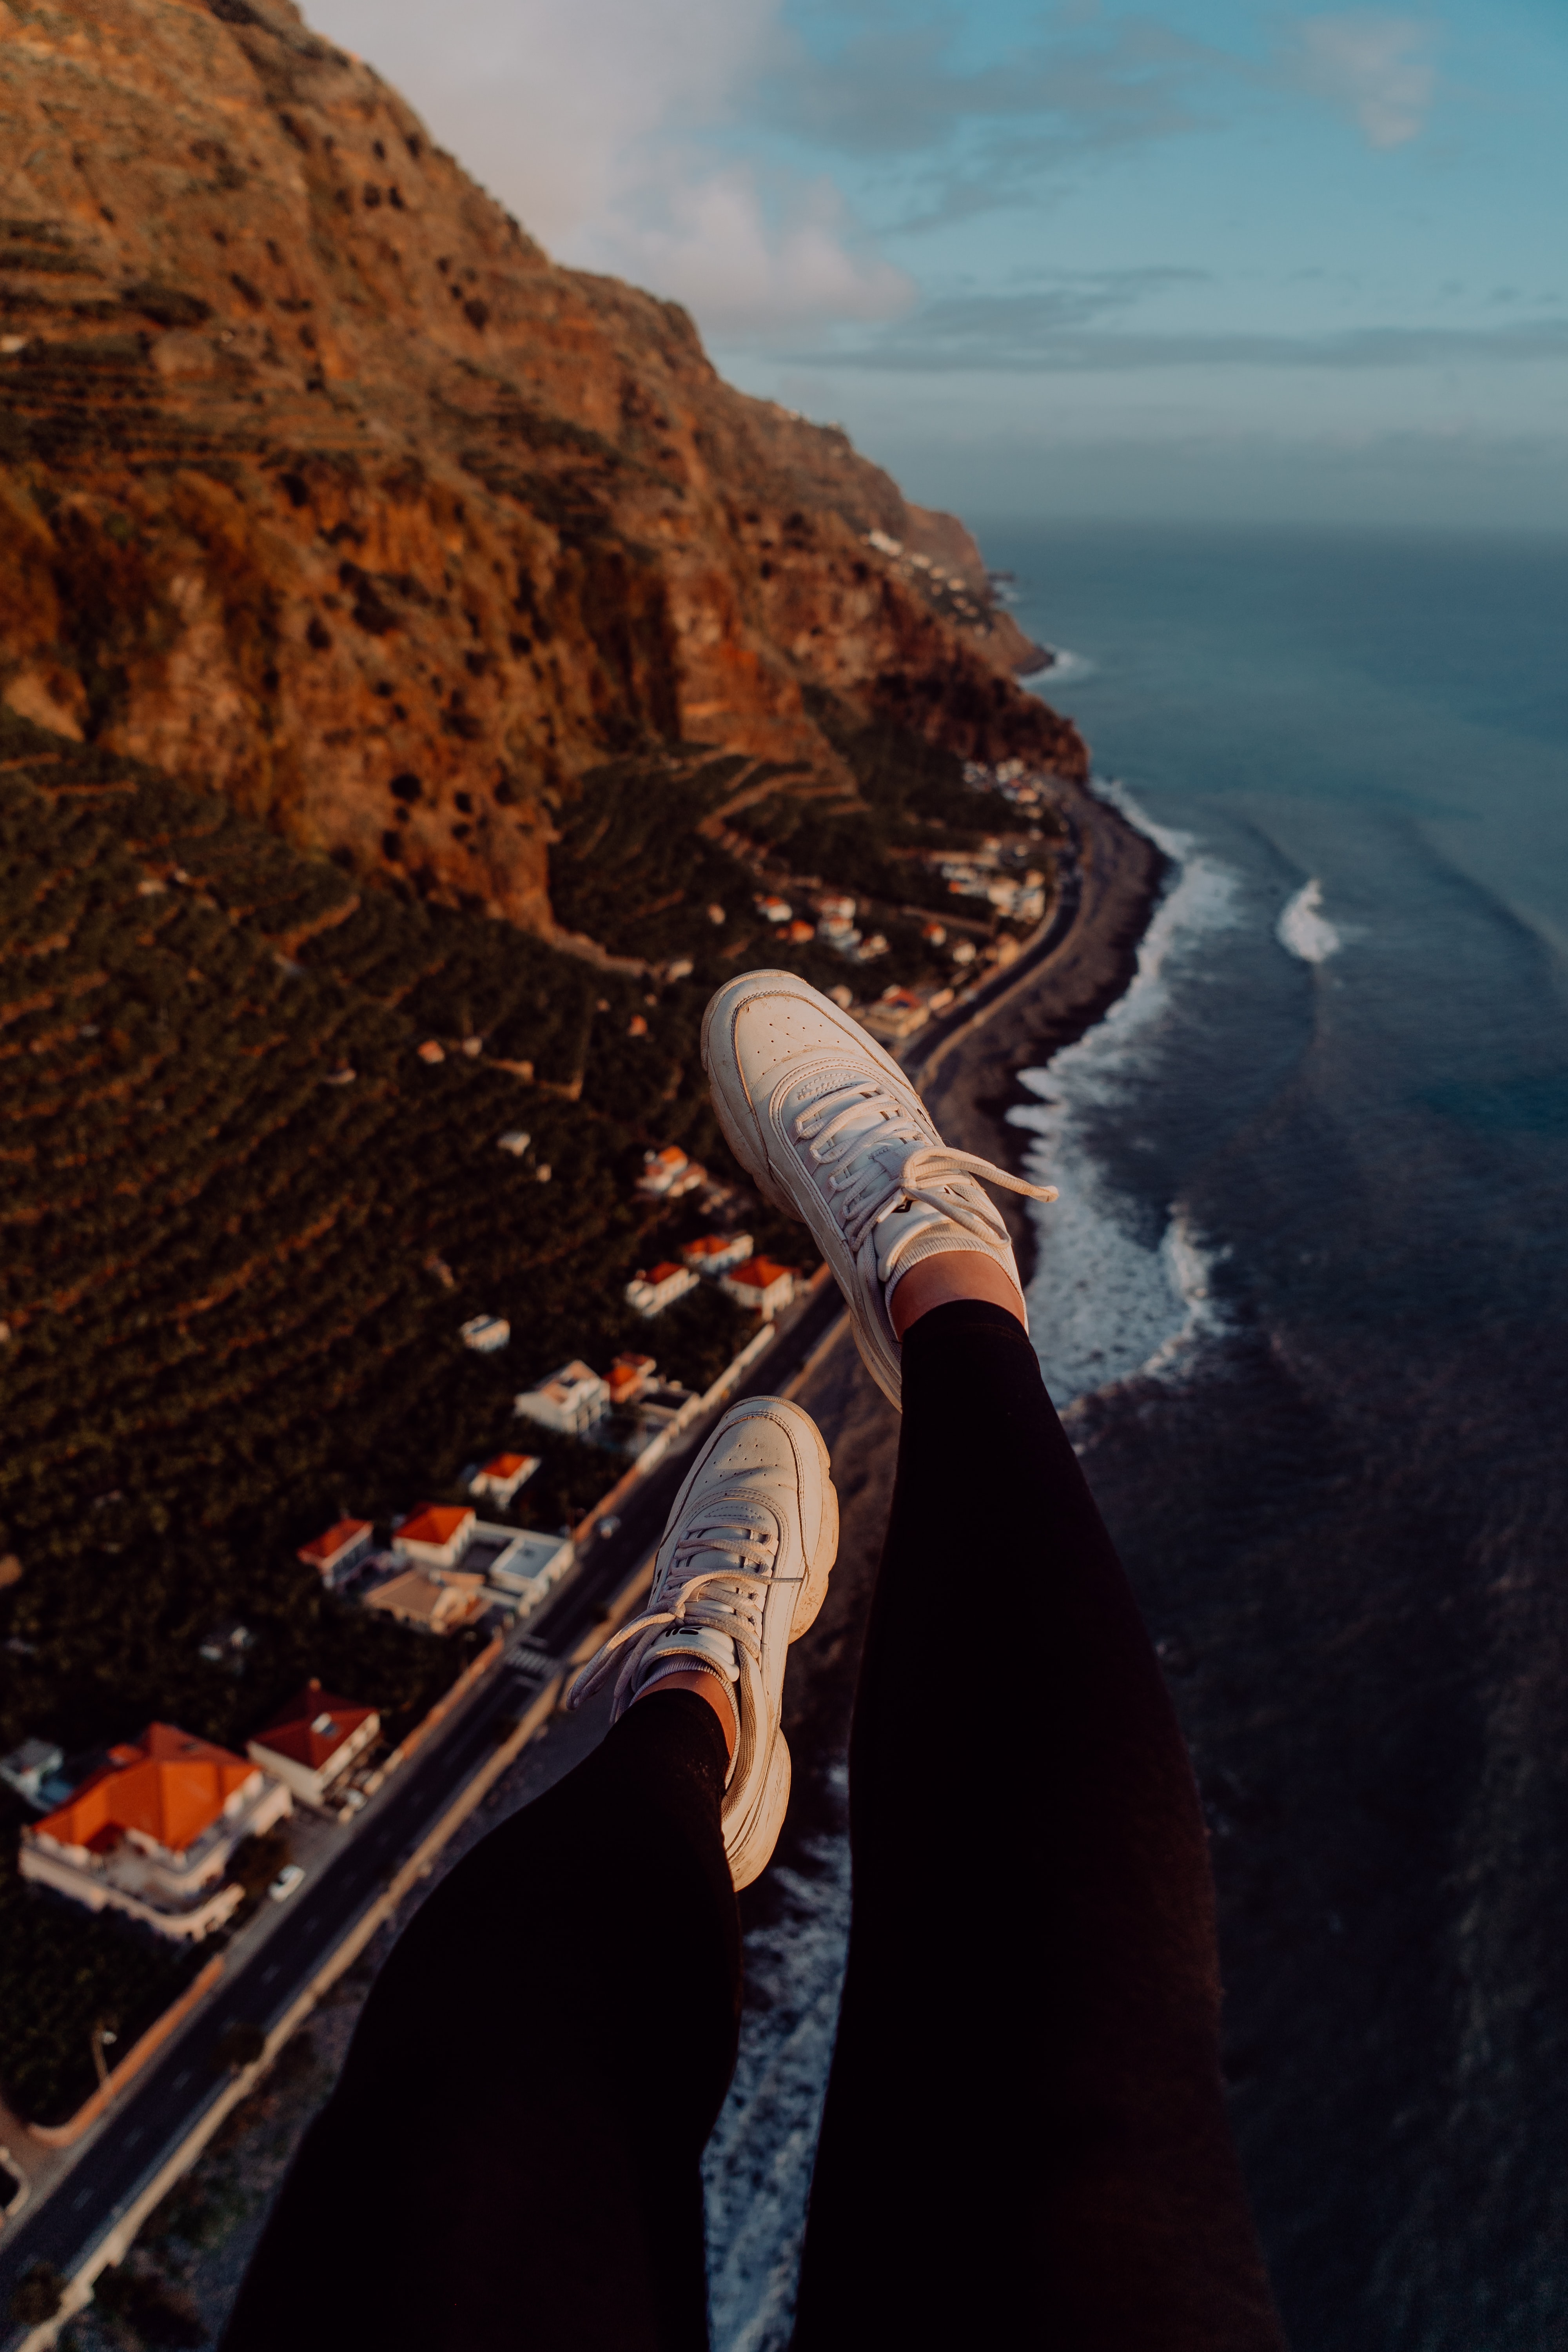 mountains, city, view from above, coast, miscellanea, miscellaneous, legs, sneakers